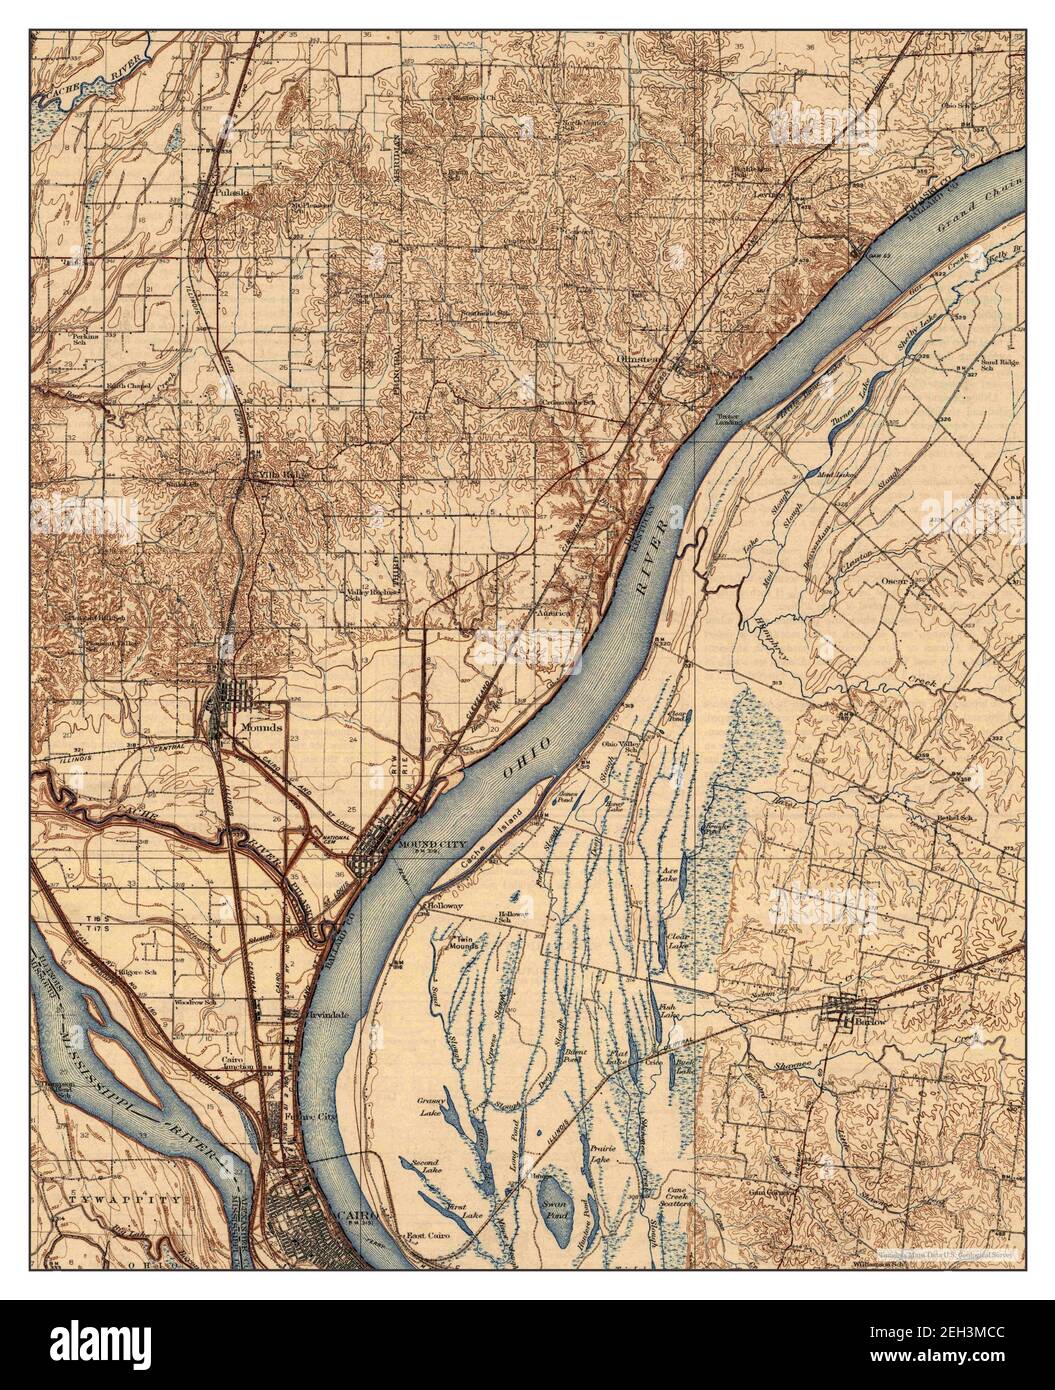 Cairo, Illinois, map 1933, 1:62500, United States of America by ...